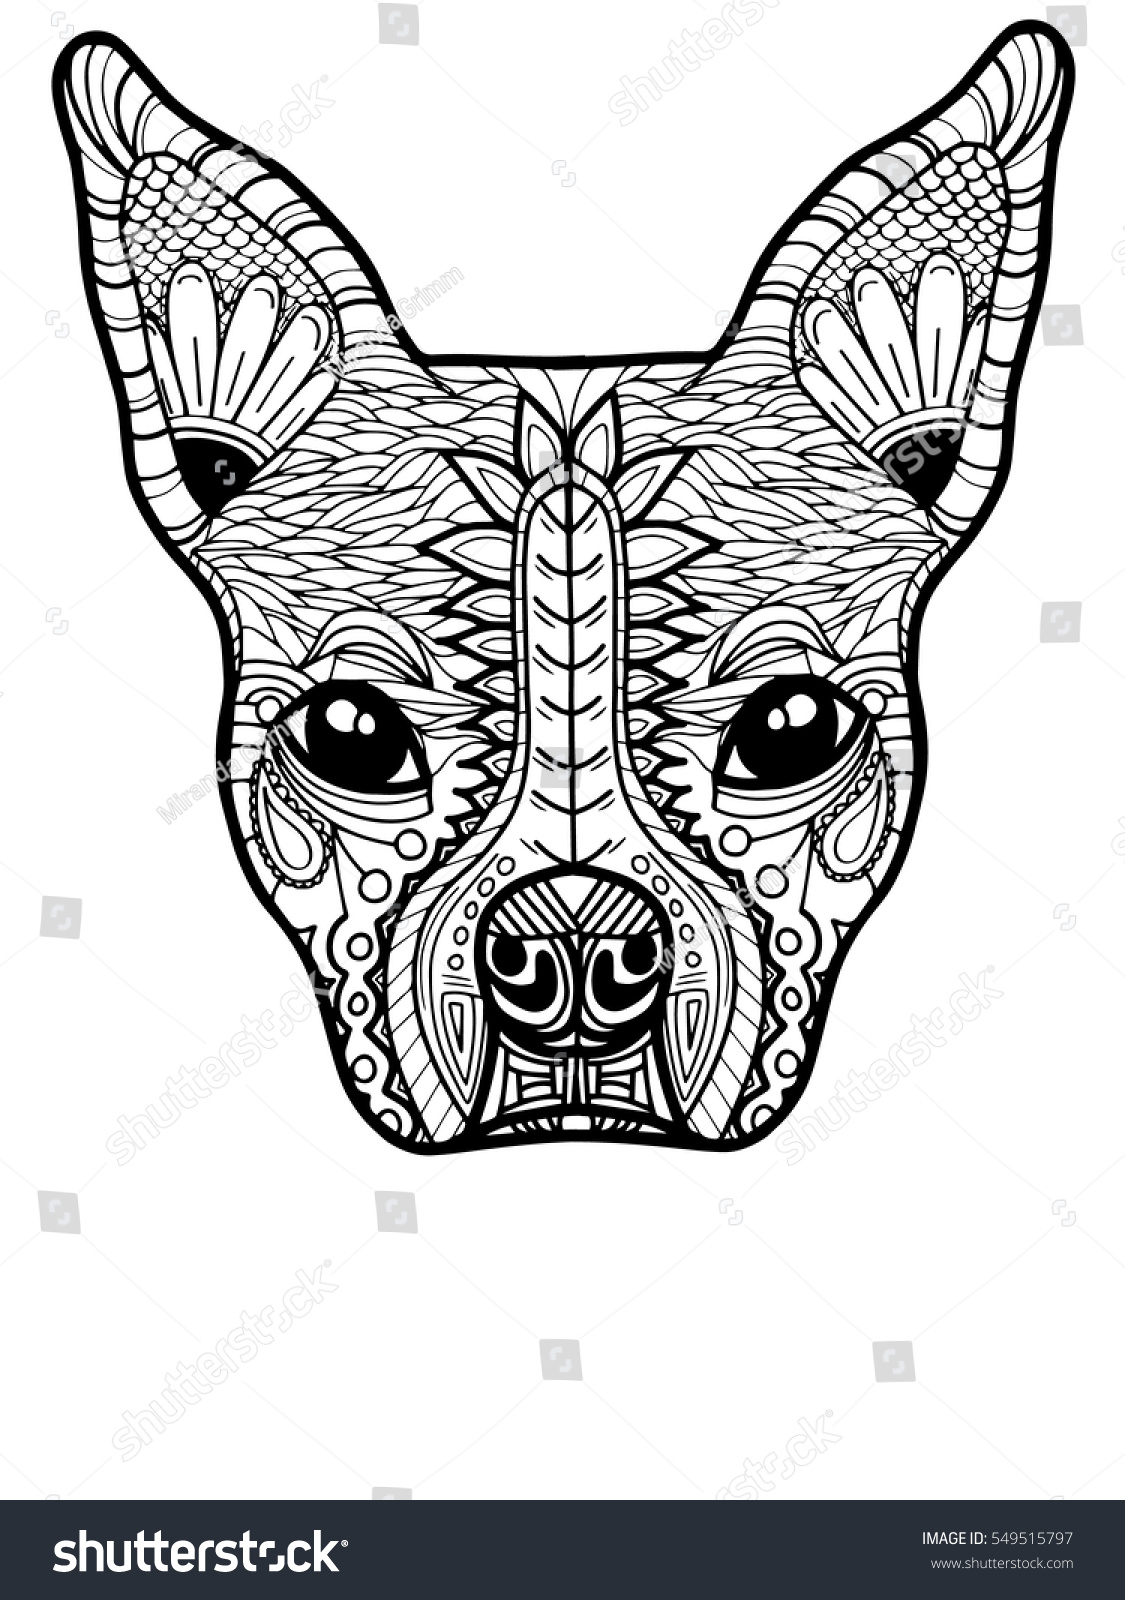 Boston Terrier or French Bulldog Adult Coloring Page